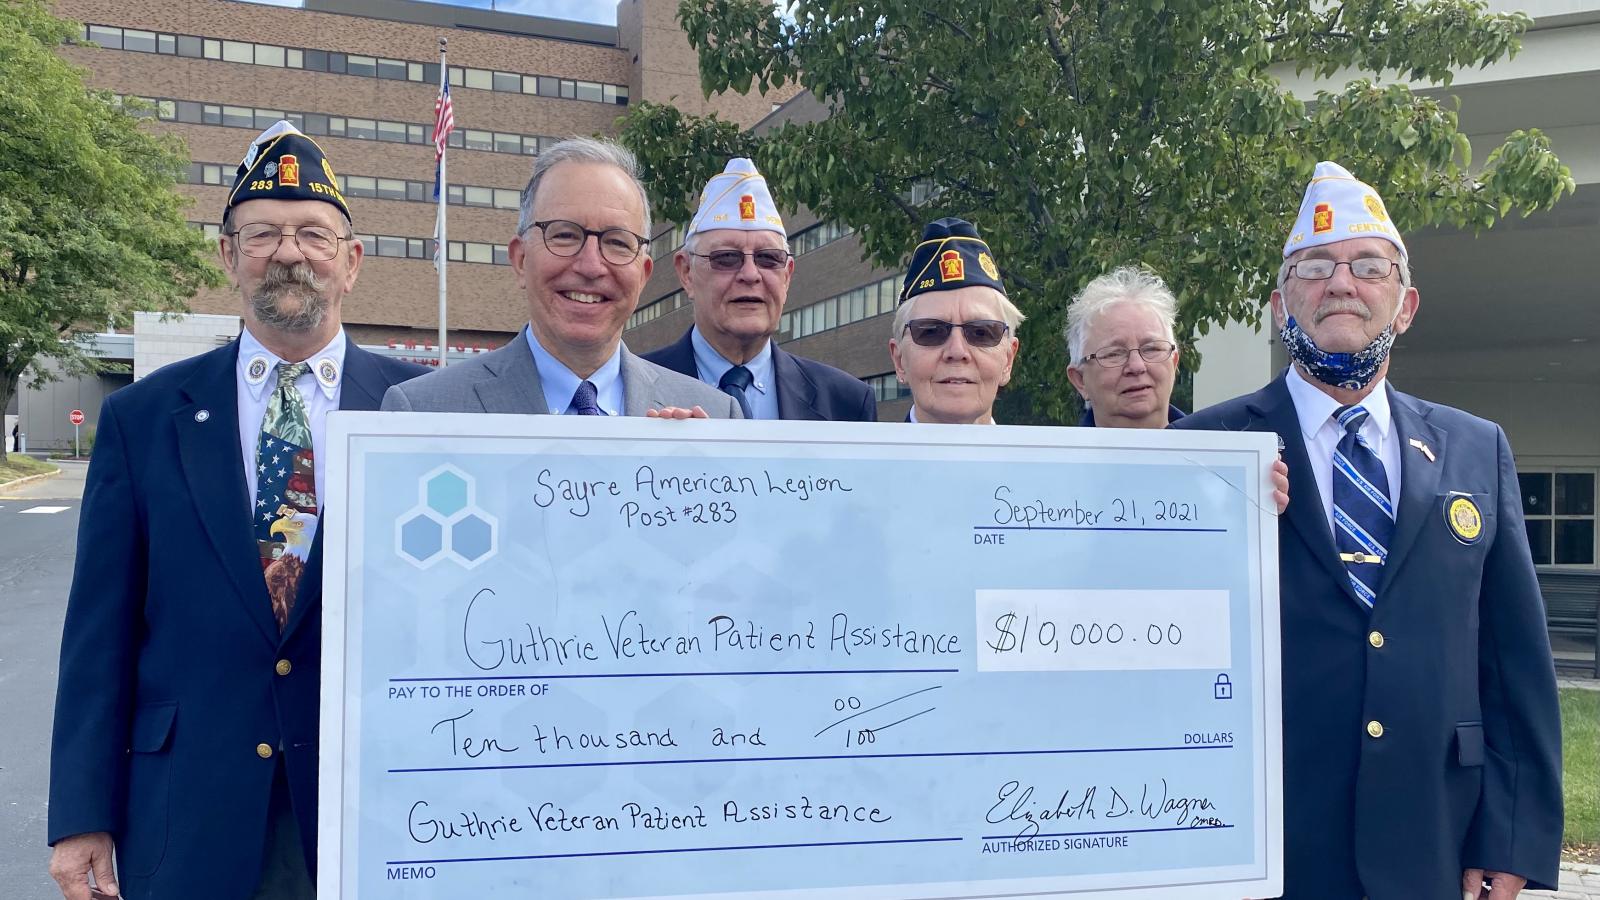 Sayre American Legion Post 283 Donates $10,000 to Guthrie Veteran Patient Assistance Fund 